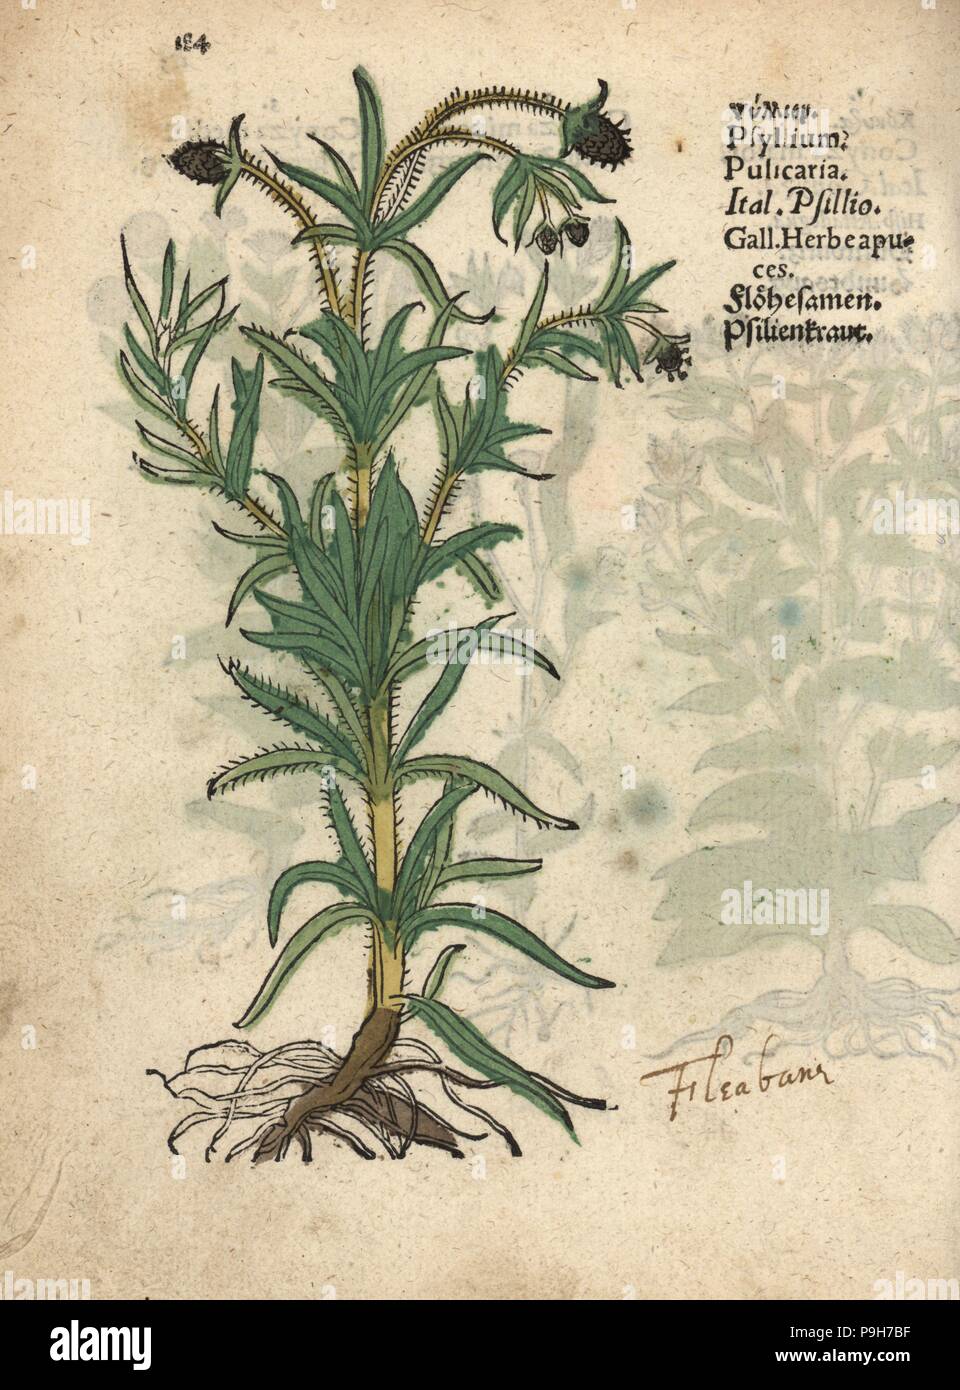 Psyllium, Plantago psyllium. Handcoloured woodblock engraving of a botanical illustration from Adam Lonicer's Krauterbuch, or Herbal, Frankfurt, 1557. This from a 17th century pirate edition or atlas of illustrations only, with captions in Latin, Greek, French, Italian, German, and in English manuscript. Stock Photo